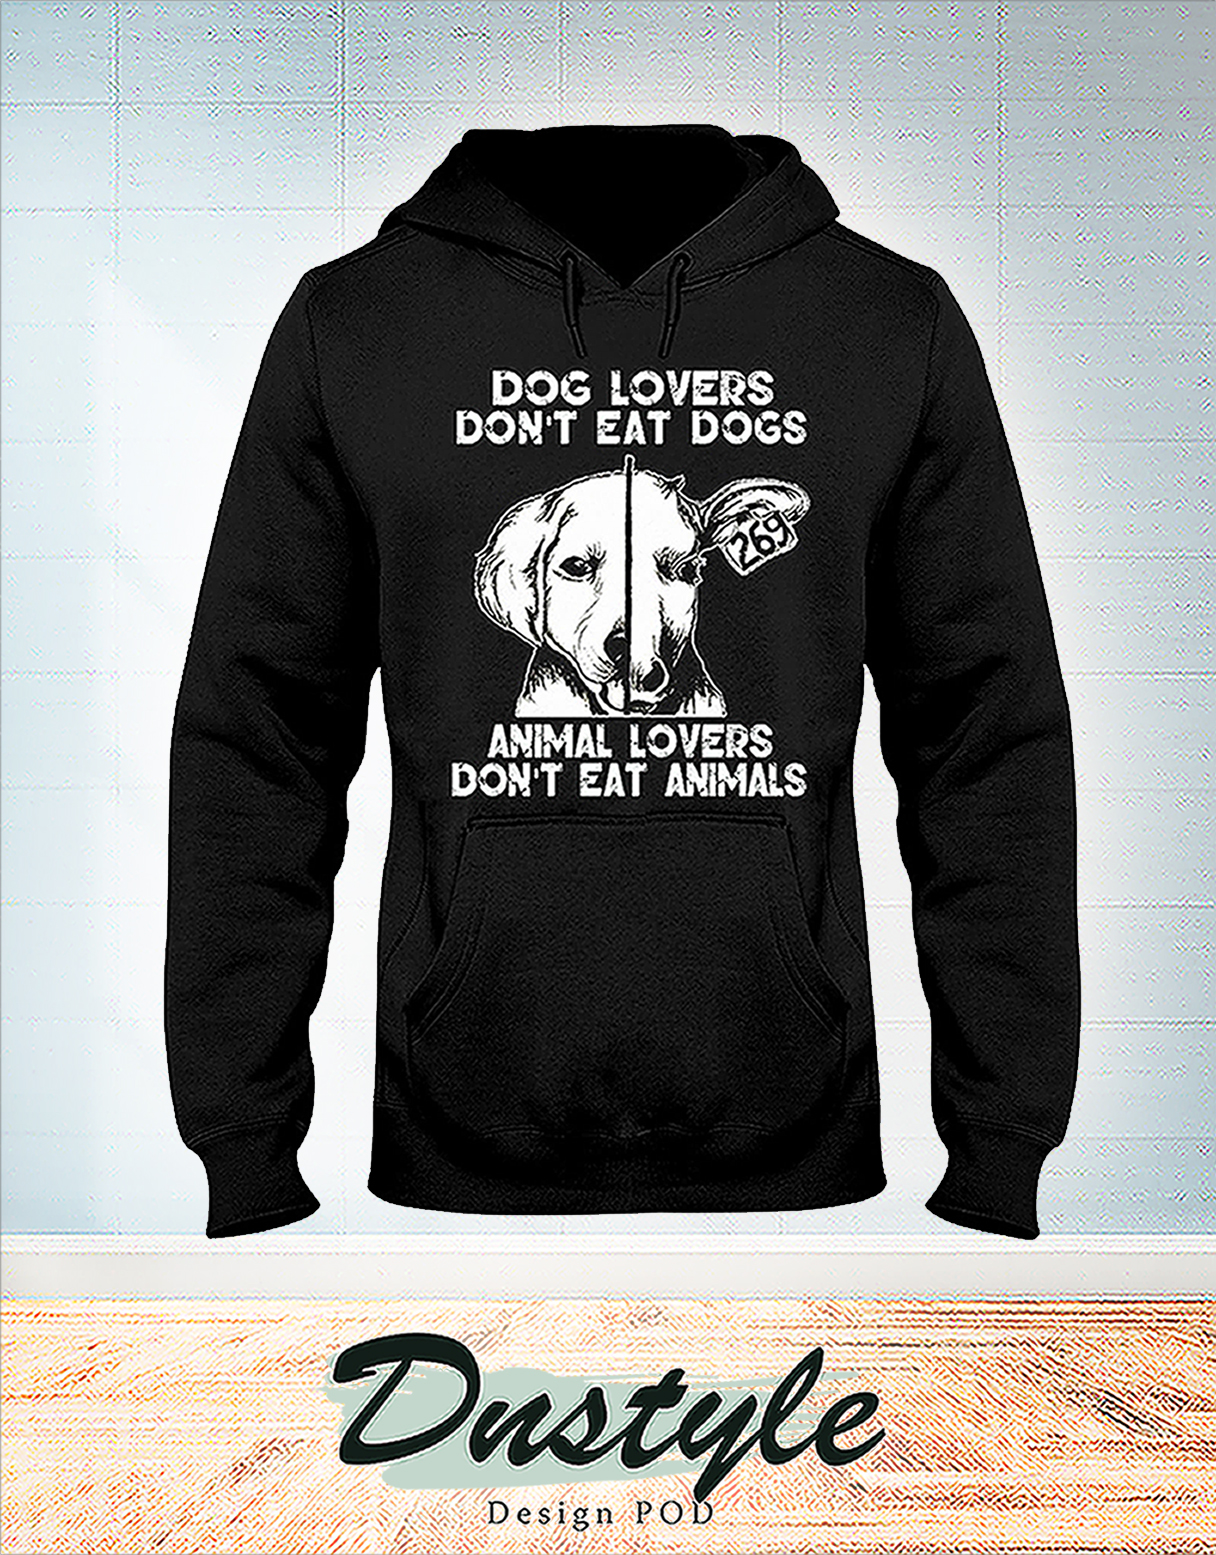 Dog lovers don't eat dogs animal lovers don't eat animals hoodie